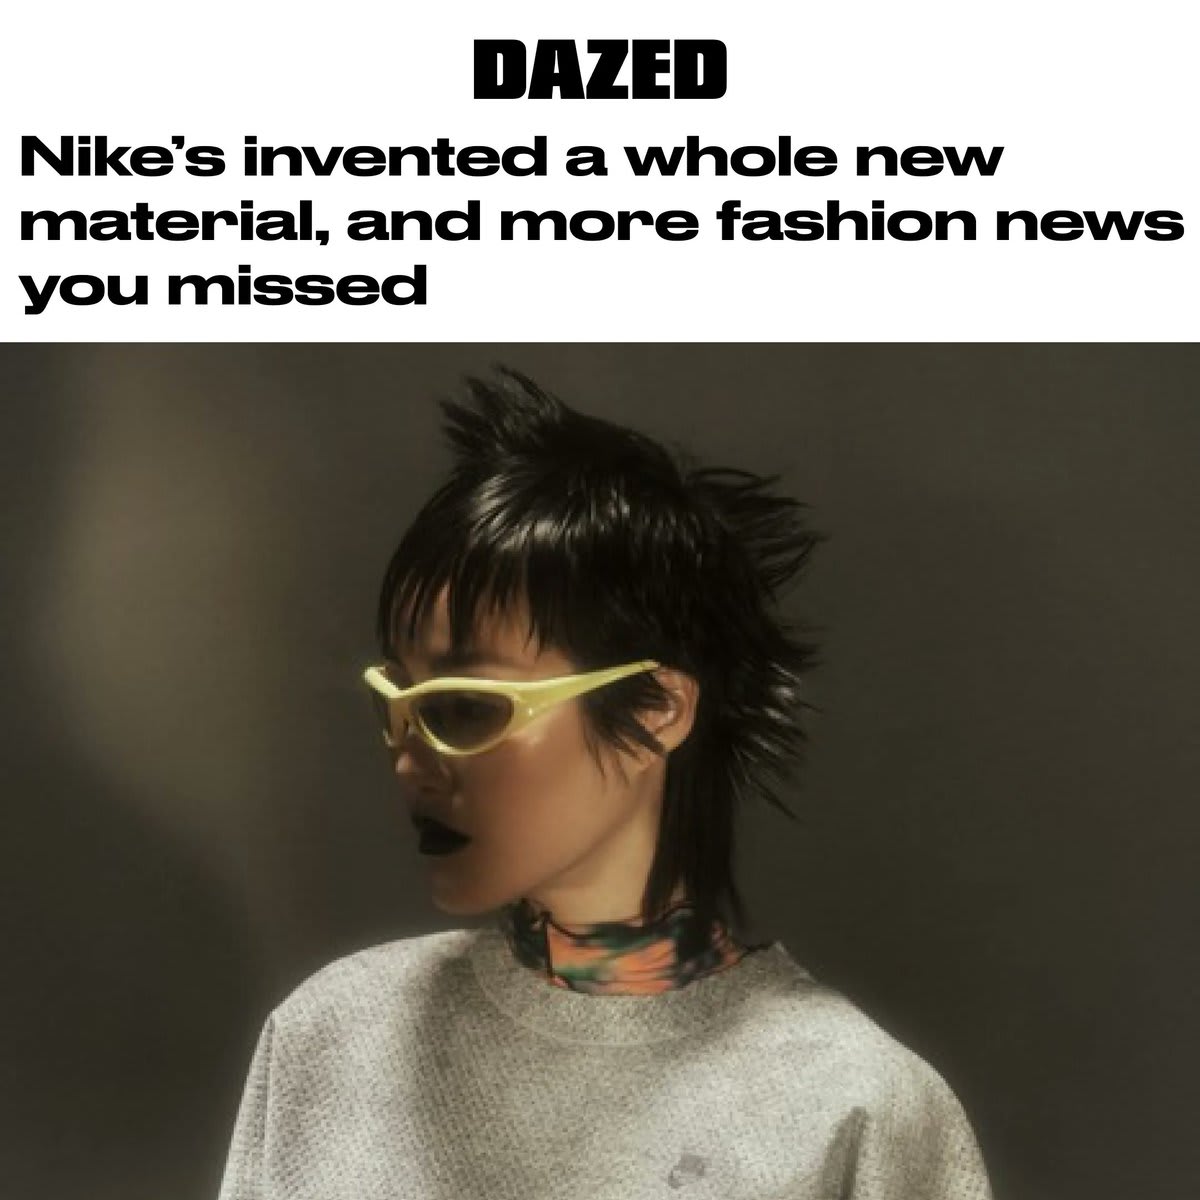 @nike invents a new material, Random Identities makes a comeback, @Stussy, @DenimTears, and @OurLegacyStore announce a collab, and LFW responds to Elizabeth II's passing. Read more fashion news you missed: